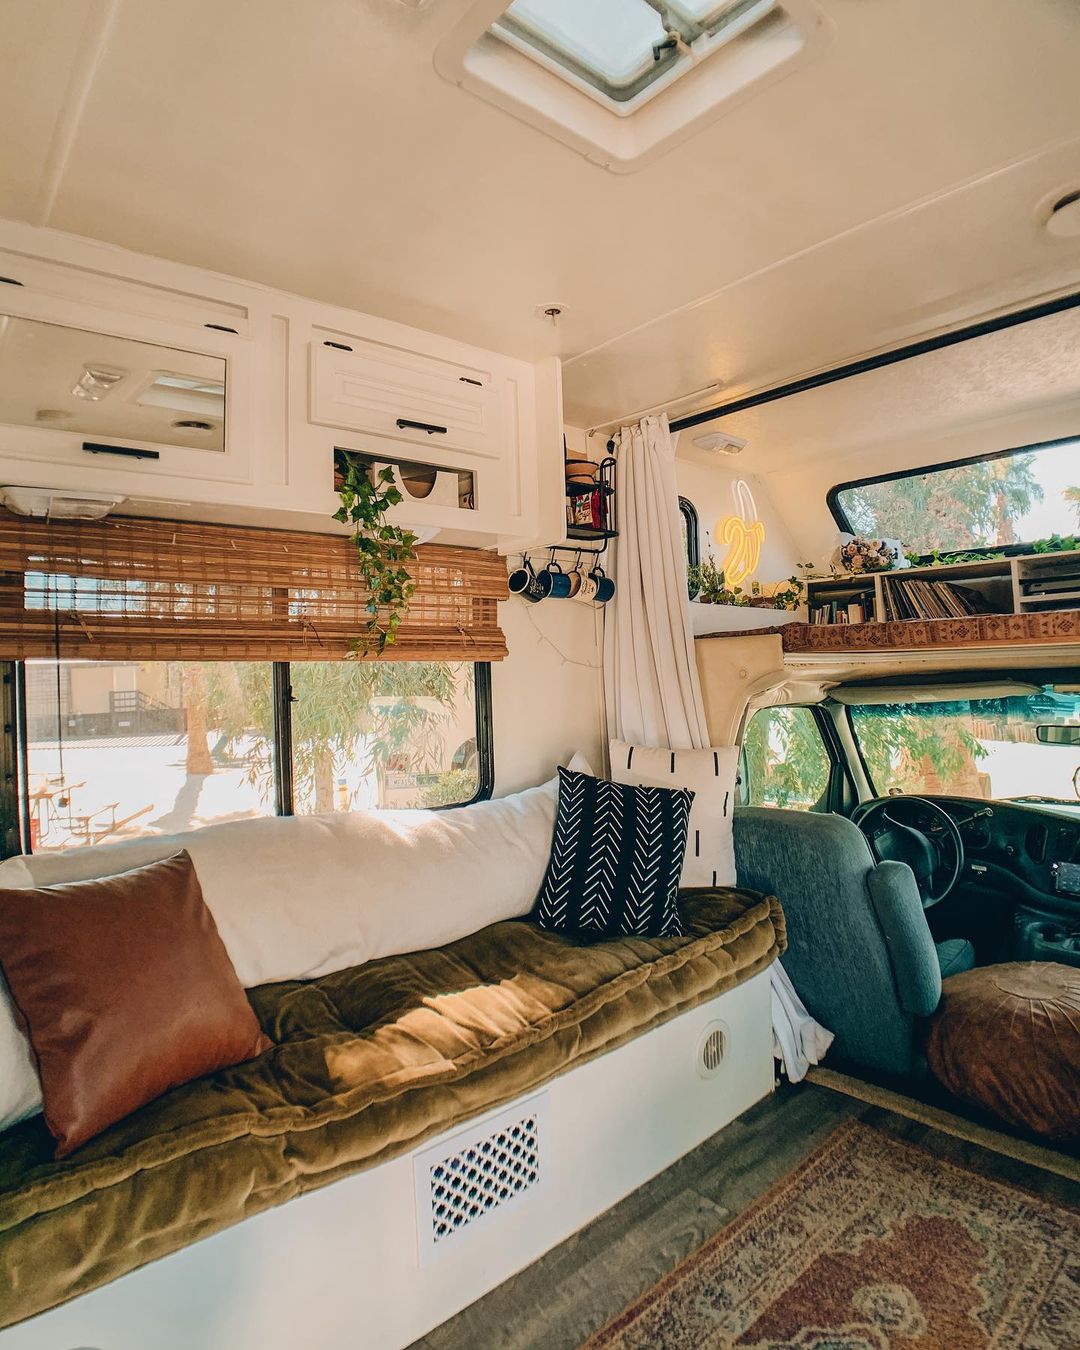 Interior of an RV with Updated Decor. Photo by Instagram user @summerginther